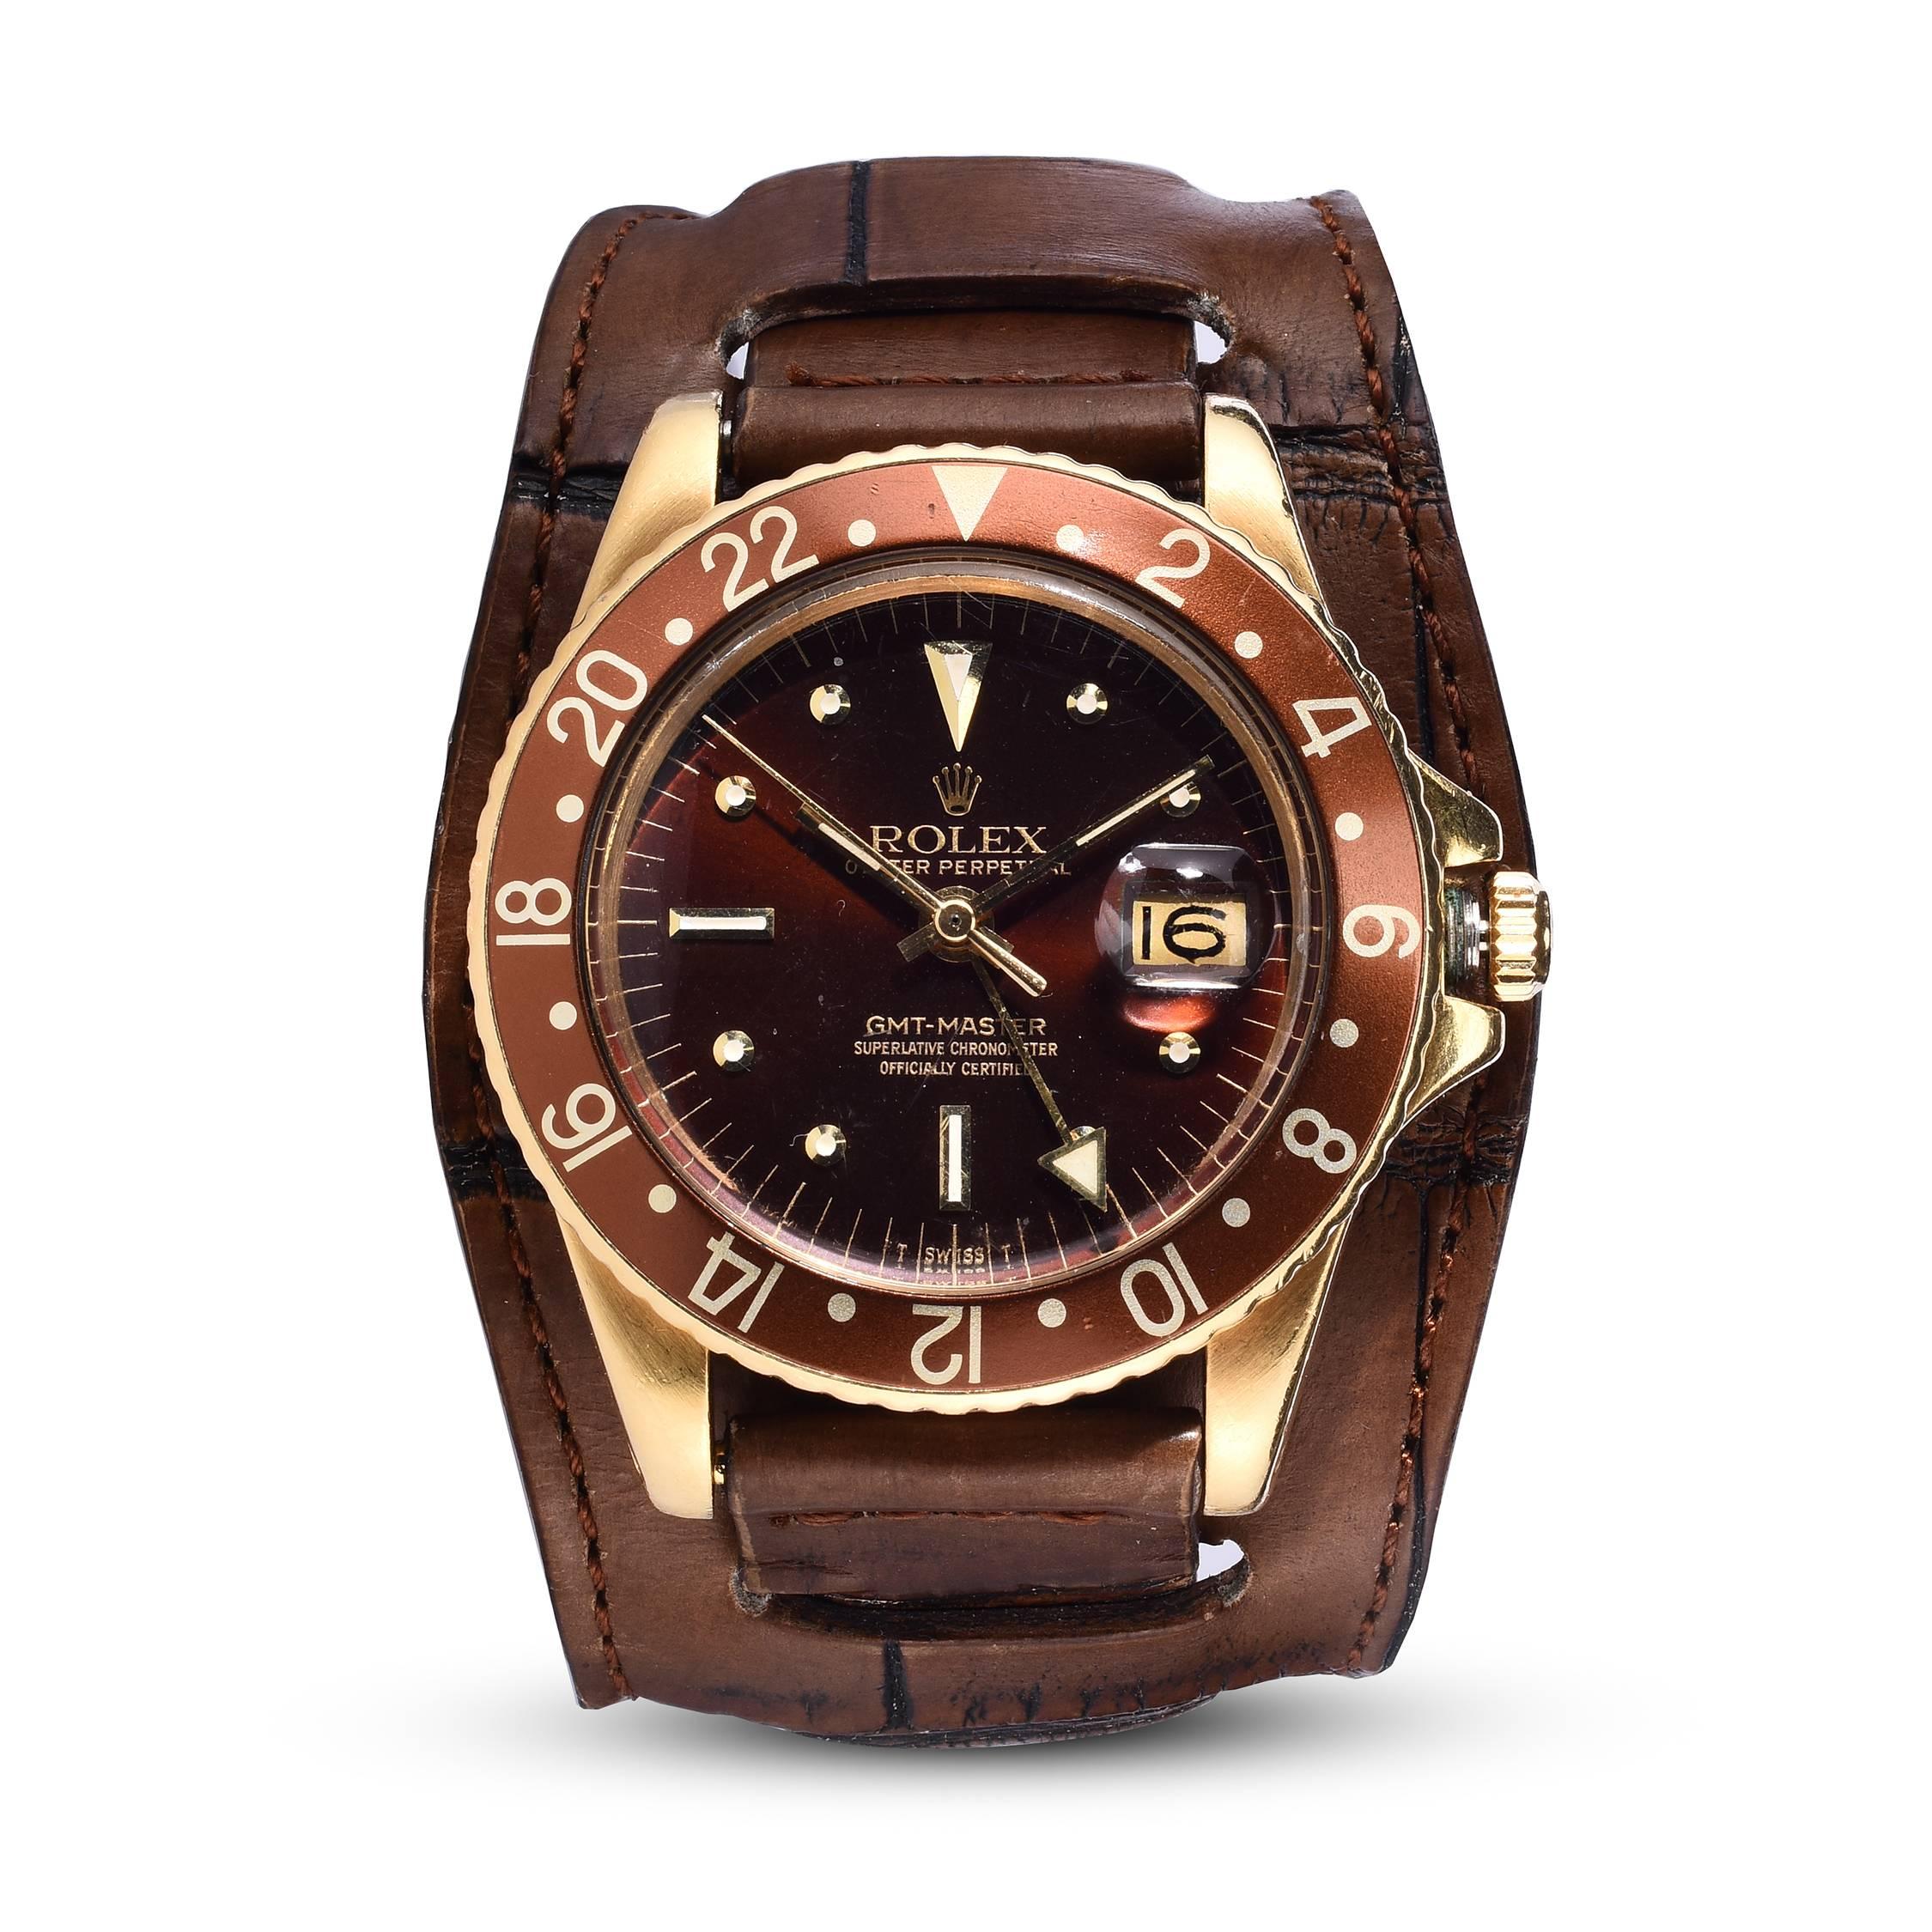 Rolex 18K Yellow Gold Oyster Perpetual GMT Master Concorde Watch
Rare Reference 1675 with 'Concorde' Hands Which are Highly Collectible and Sought After and Were Only Produced for Two to Three Years 
Brown Gloss Nipple Dial with Matching Brown